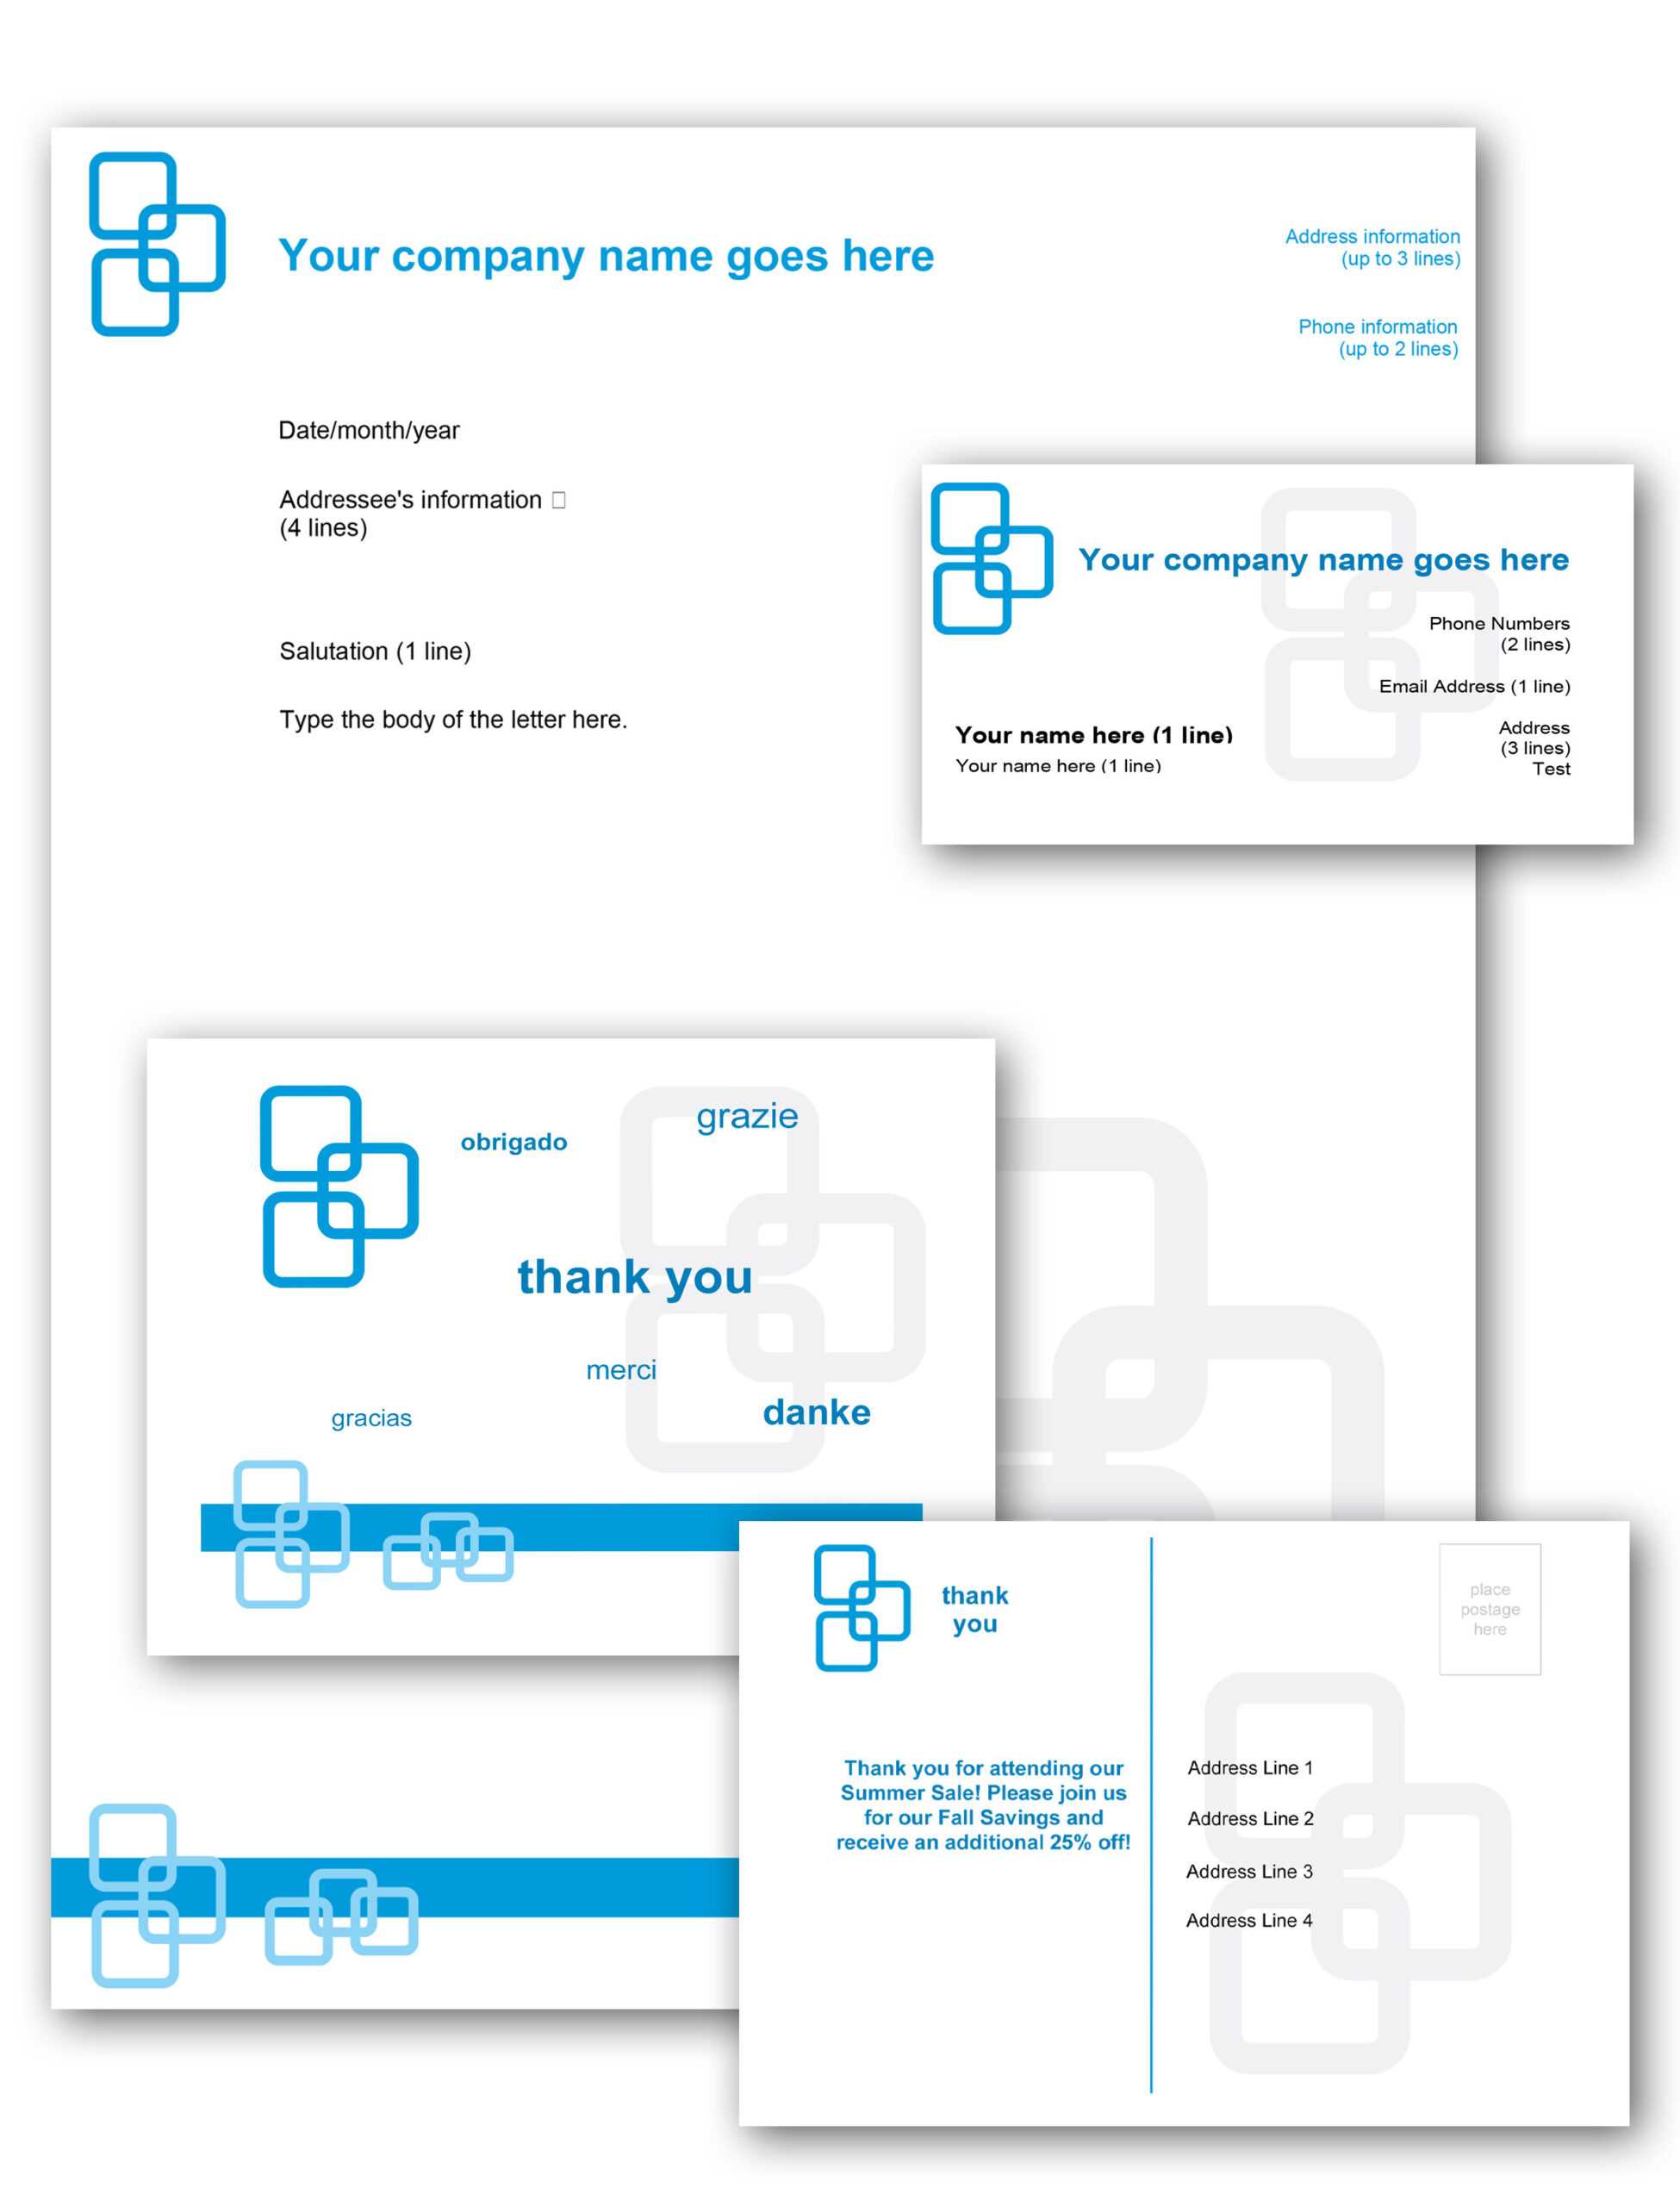 Business Card Templates | Xerox For Small Businesses Pertaining To Email Business Card Templates